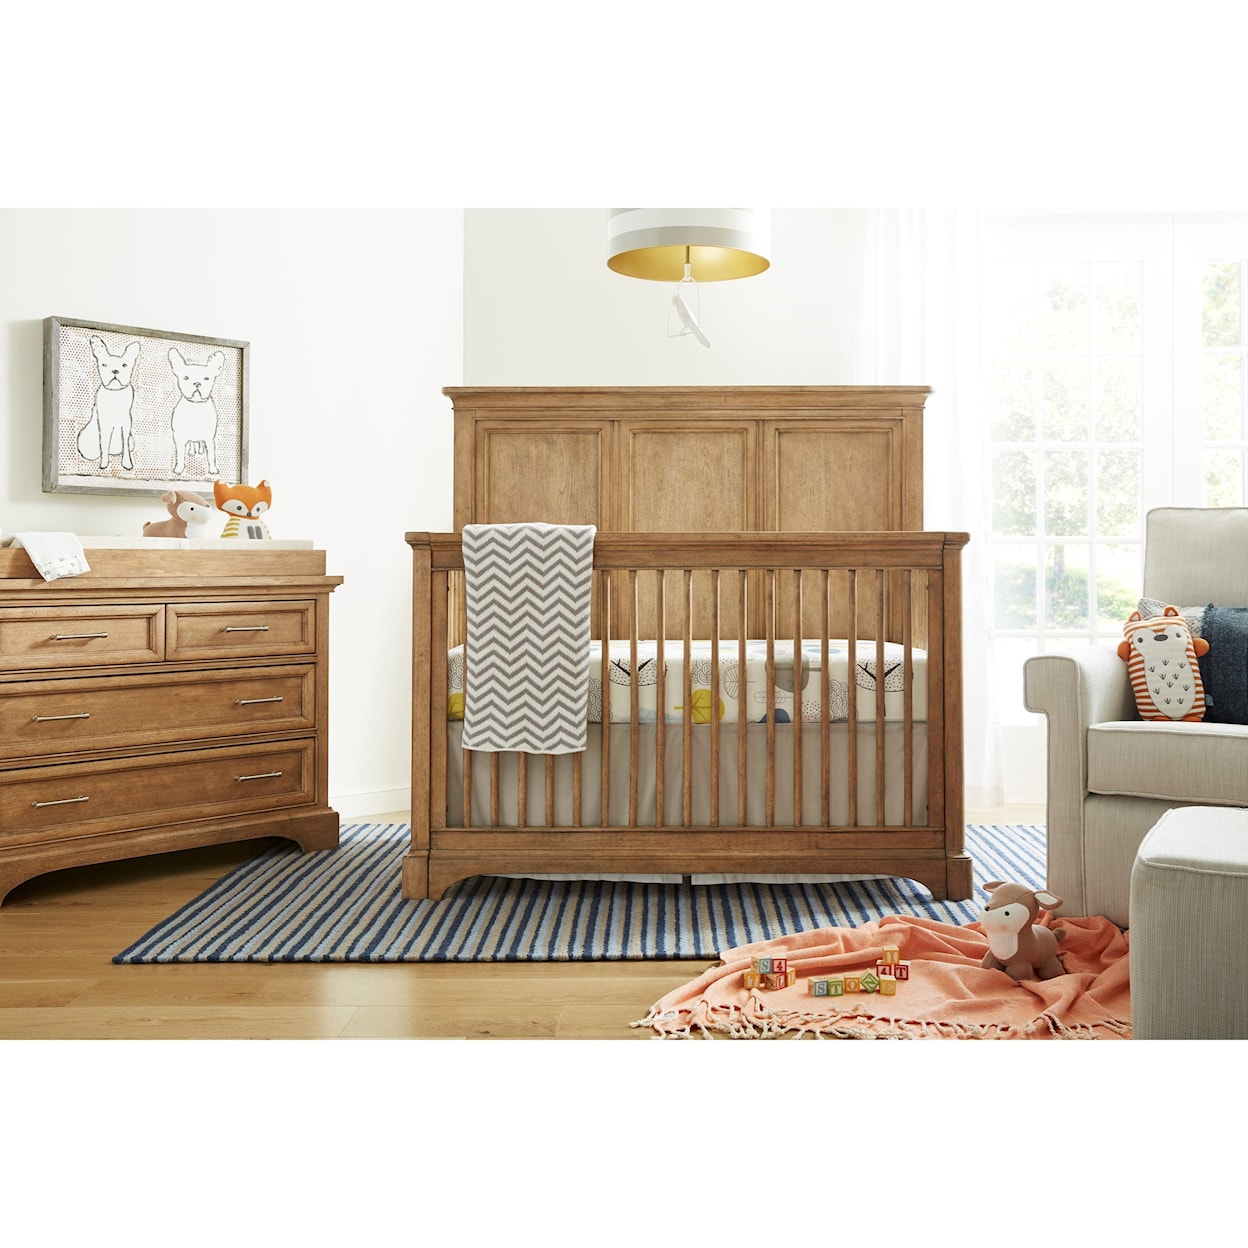 CH Living for Stone & Leigh Zoe Glider